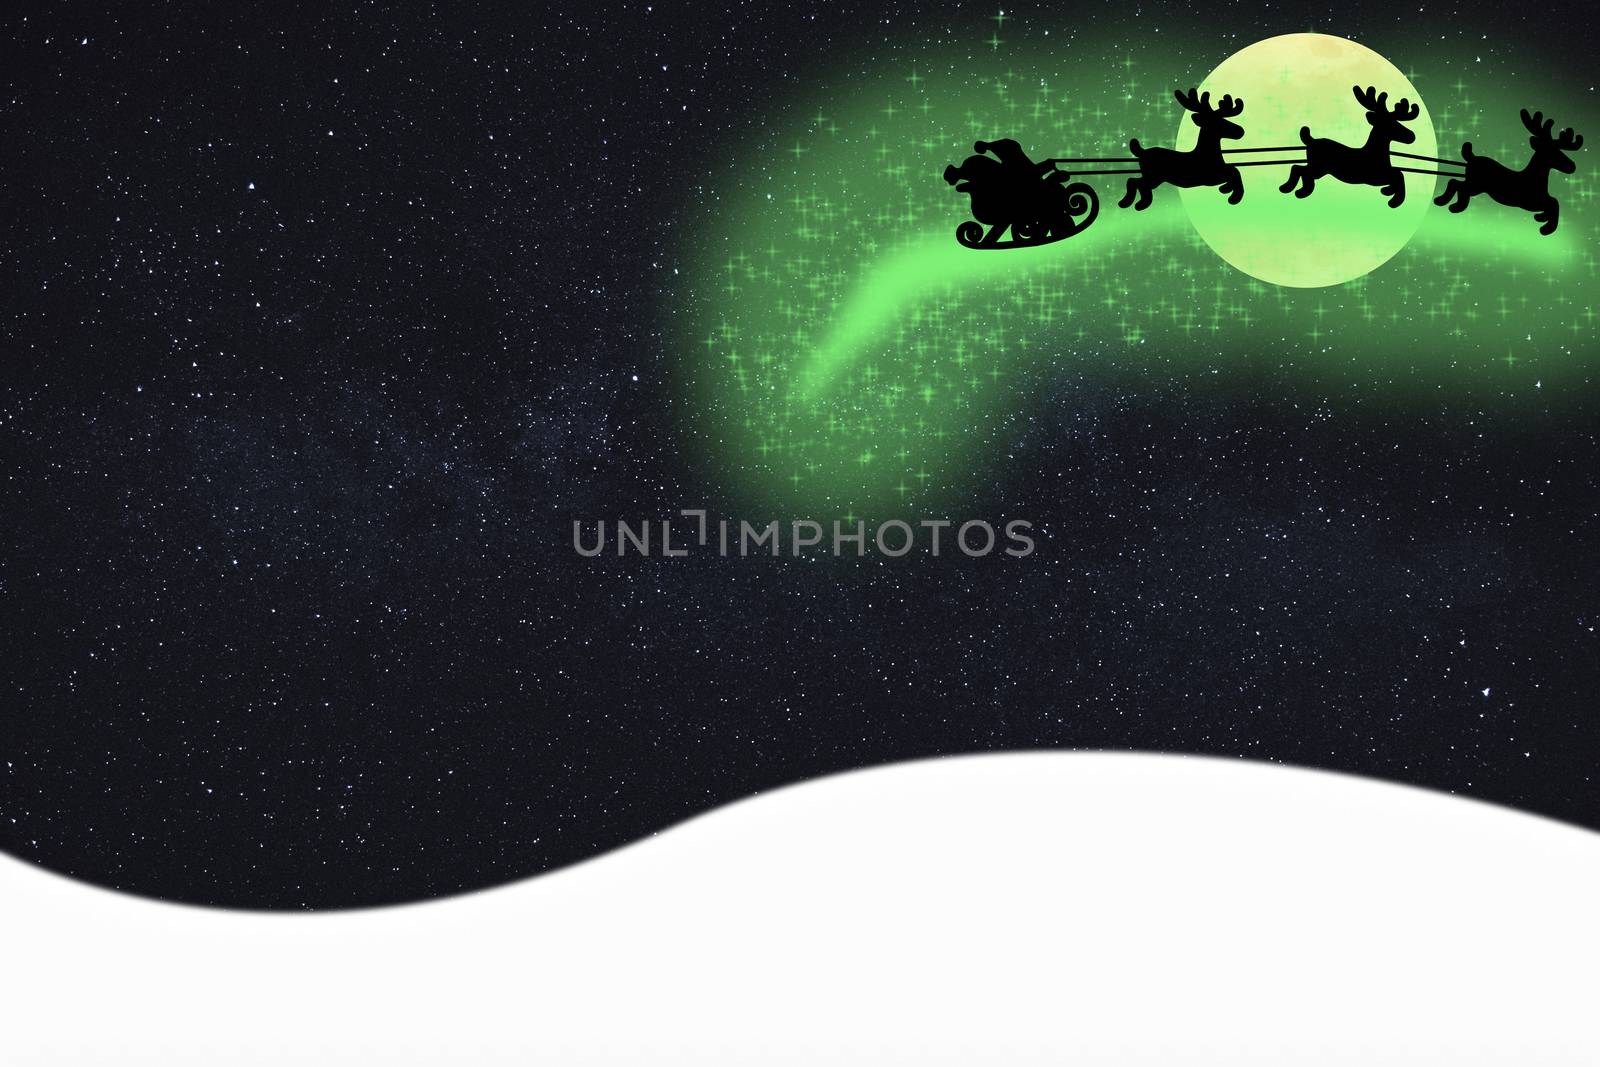 merry christmas card santa claus flying in the air on his sleigh leaving magical sparkle star dust at night time with a sky filled with stars by charlottebleijenberg